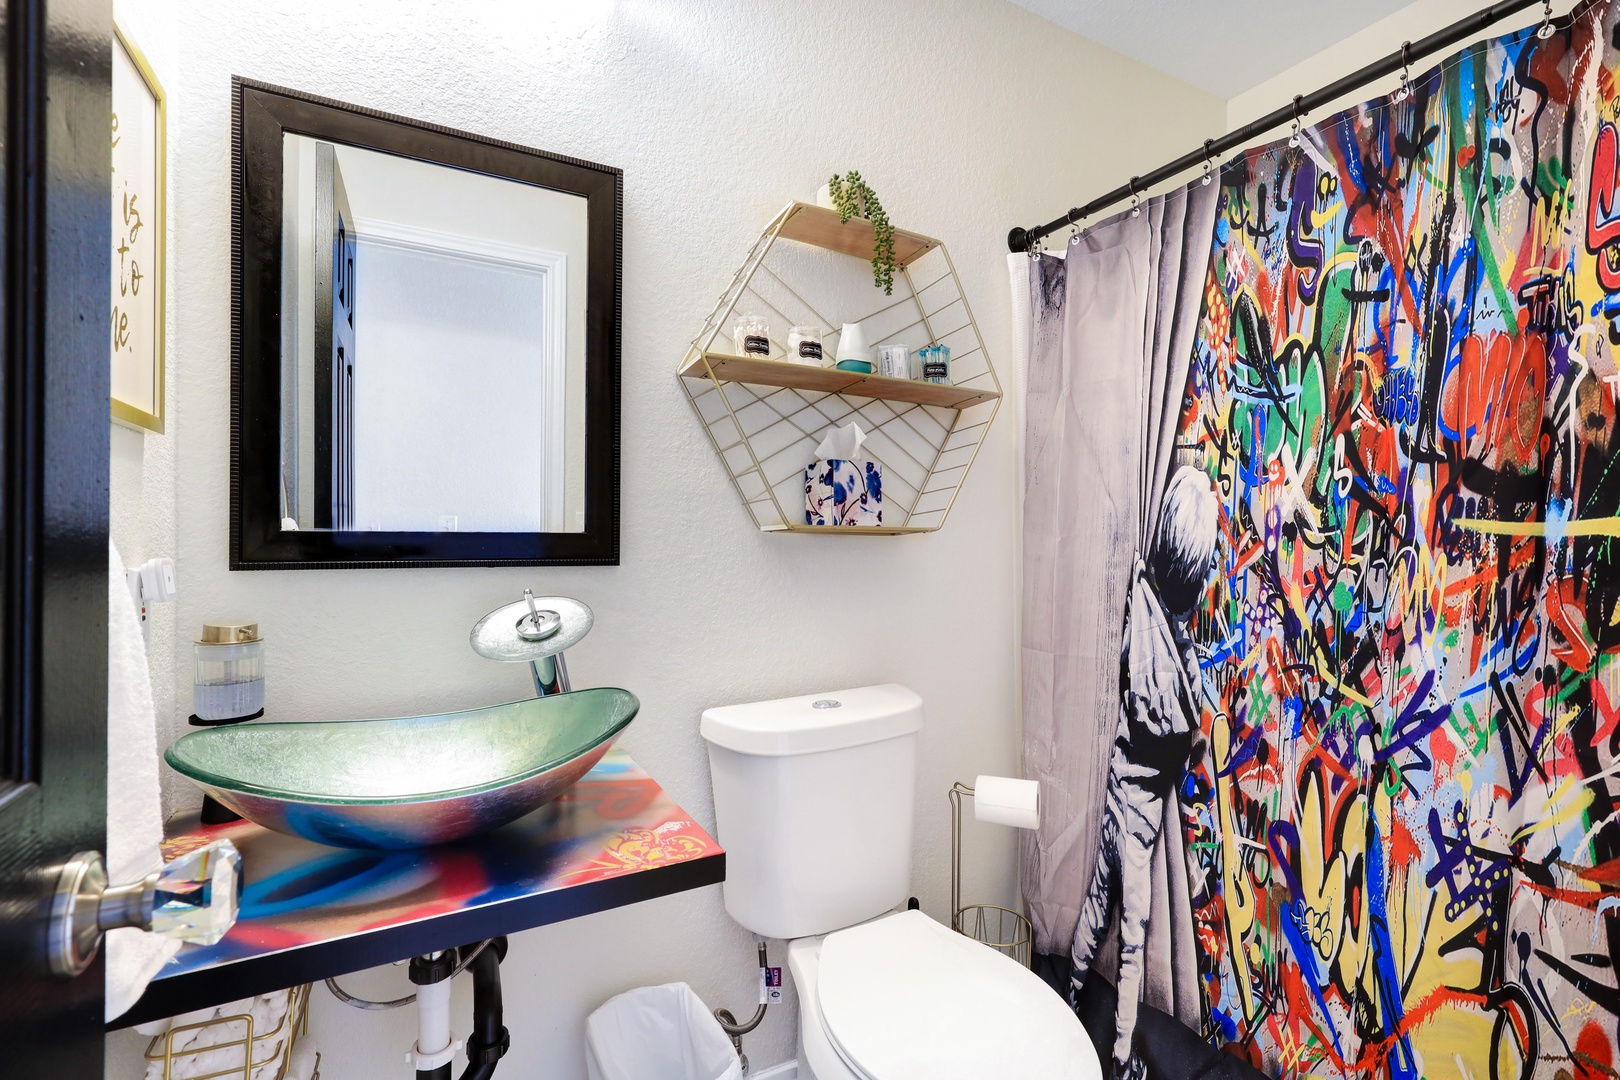 The full bath on the main level includes a chic vanity & walk-in shower